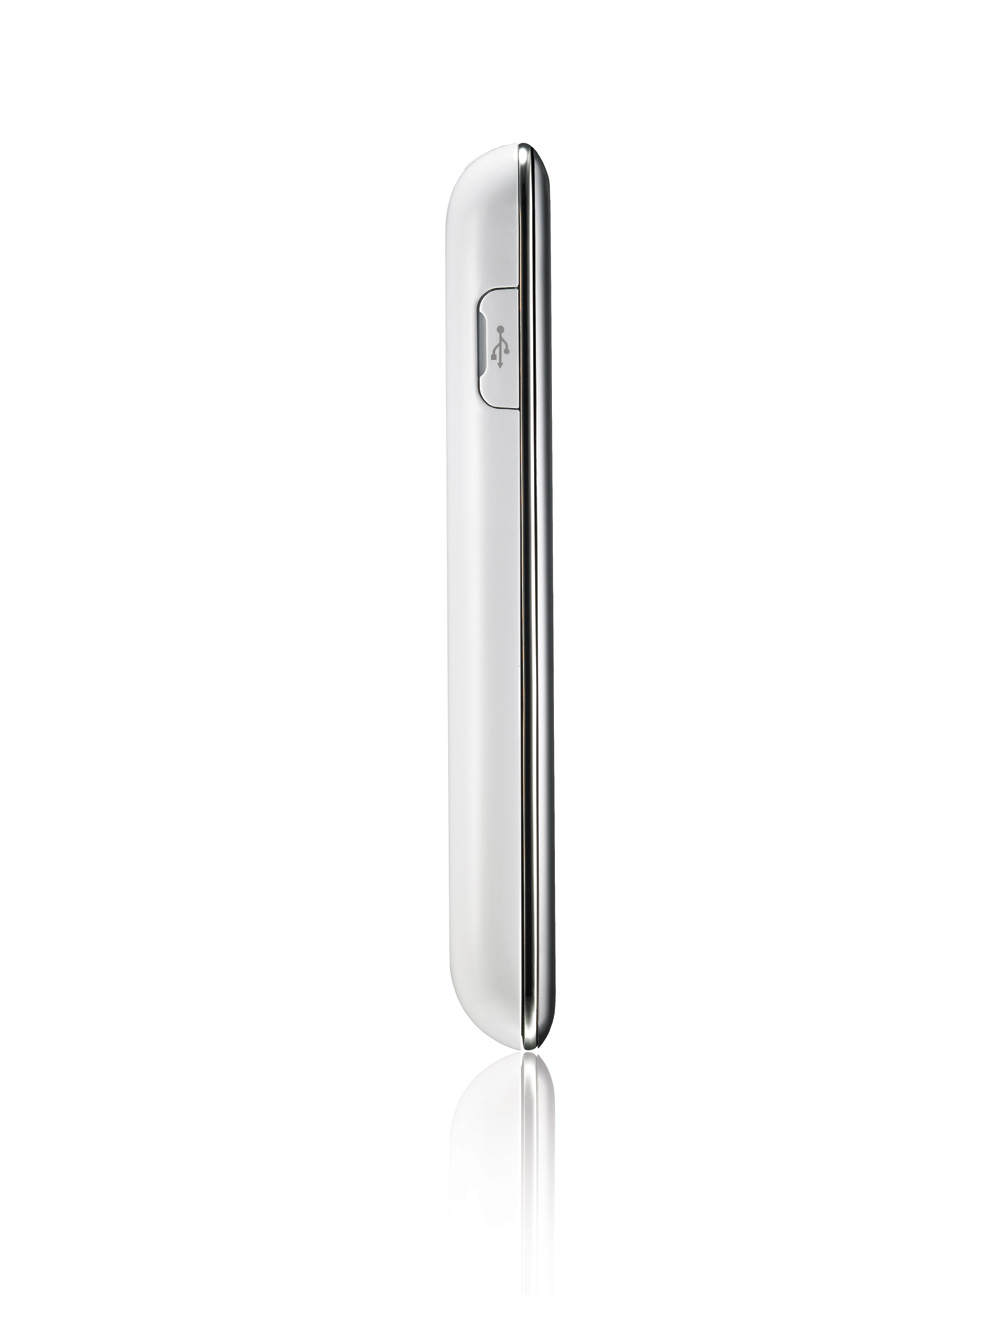 Side view of the LG Optimus Chic’s left side, displaying its USB jack